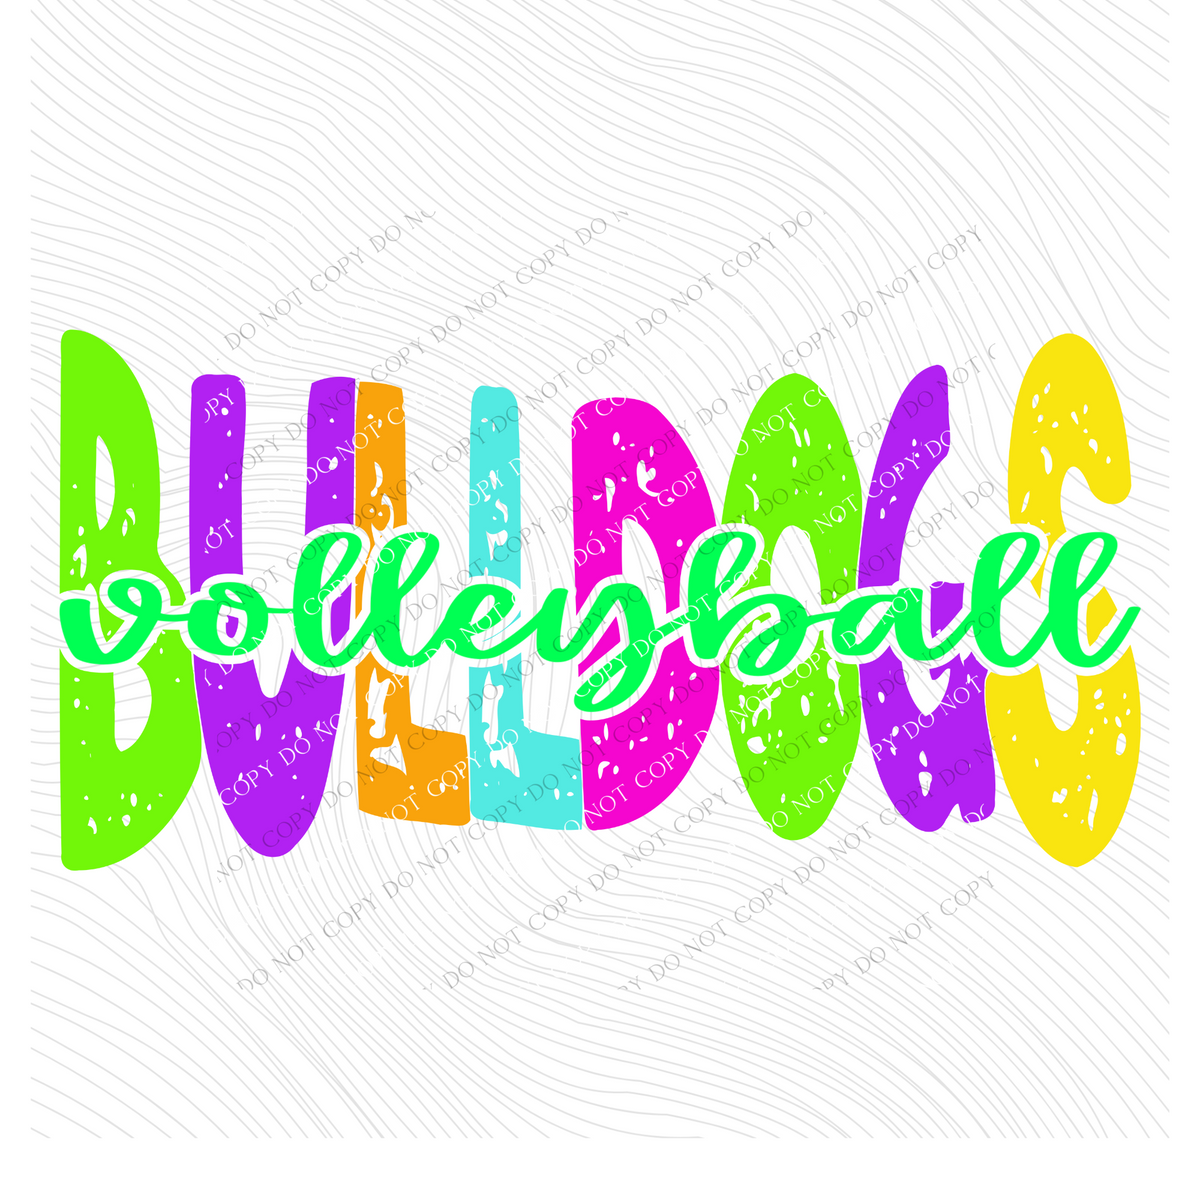 Bulldogs Distressed Blank, Cutout Softball, Baseball & Volleyball in Neons all Included Digital Design, PNG